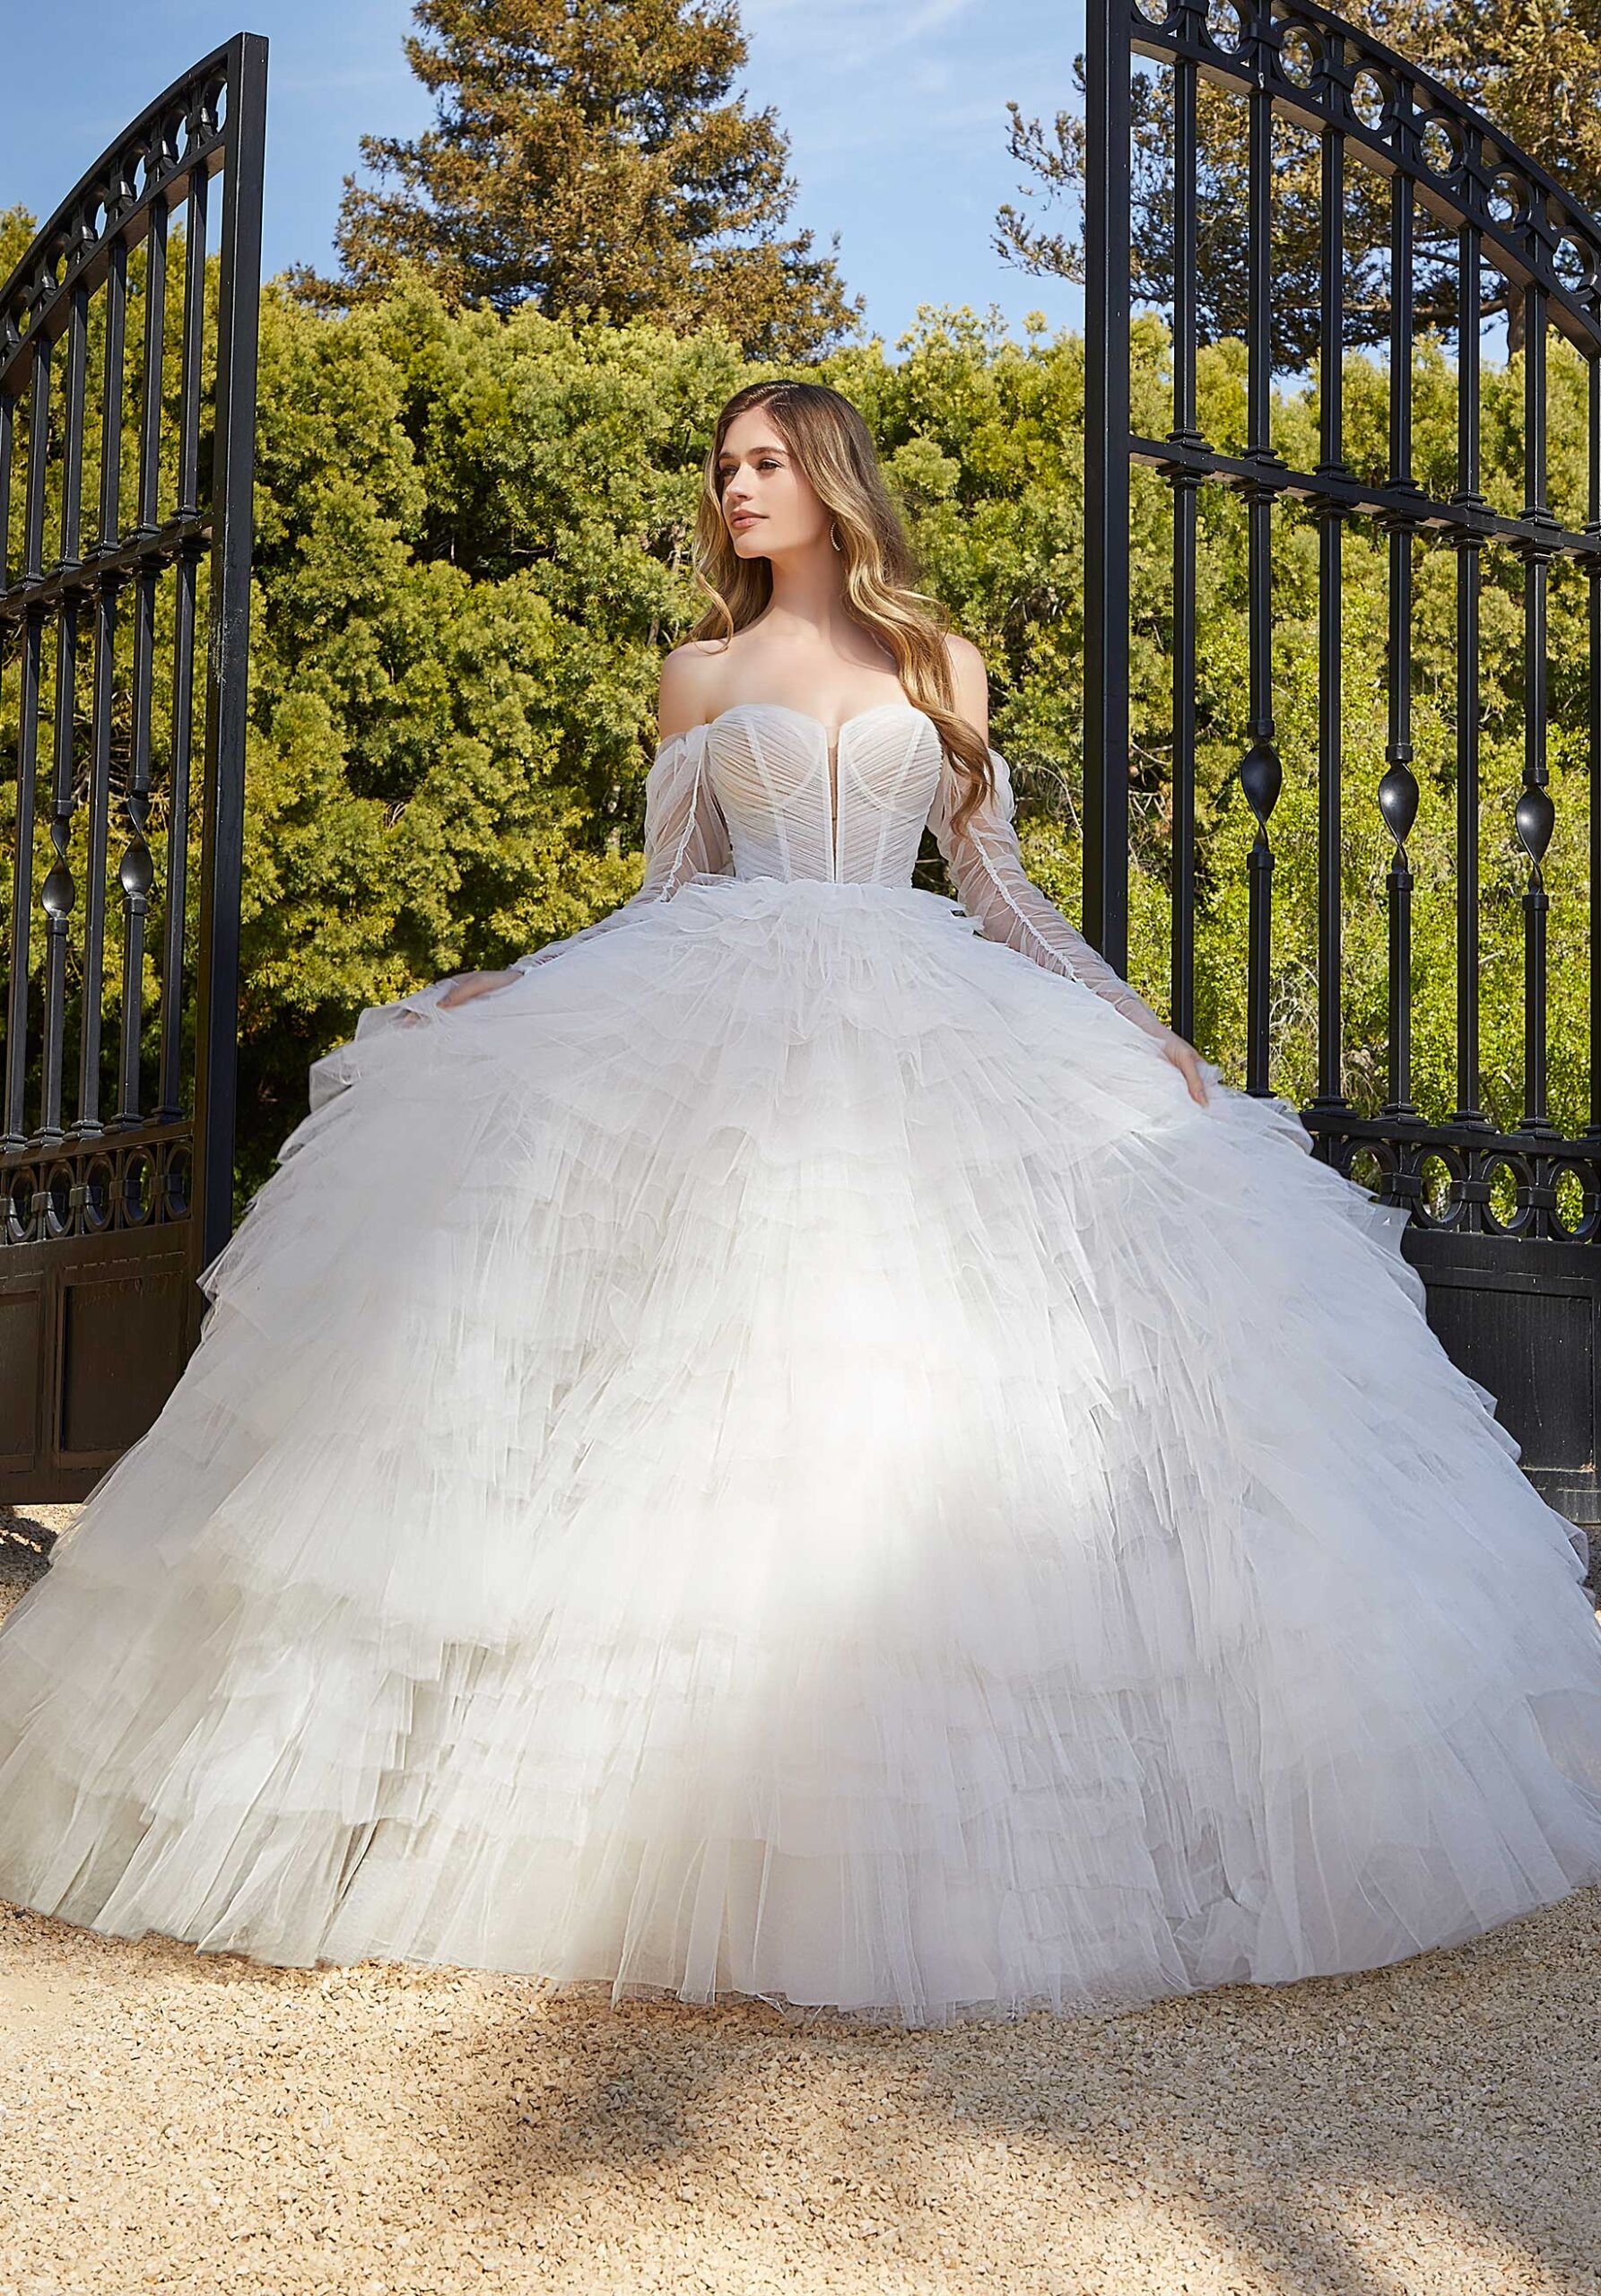 Winter Wedding Dresses & Gowns | Buy a Casual Winter Wedding Dress Online  at Devotion Dresses | Devotiondresses.com